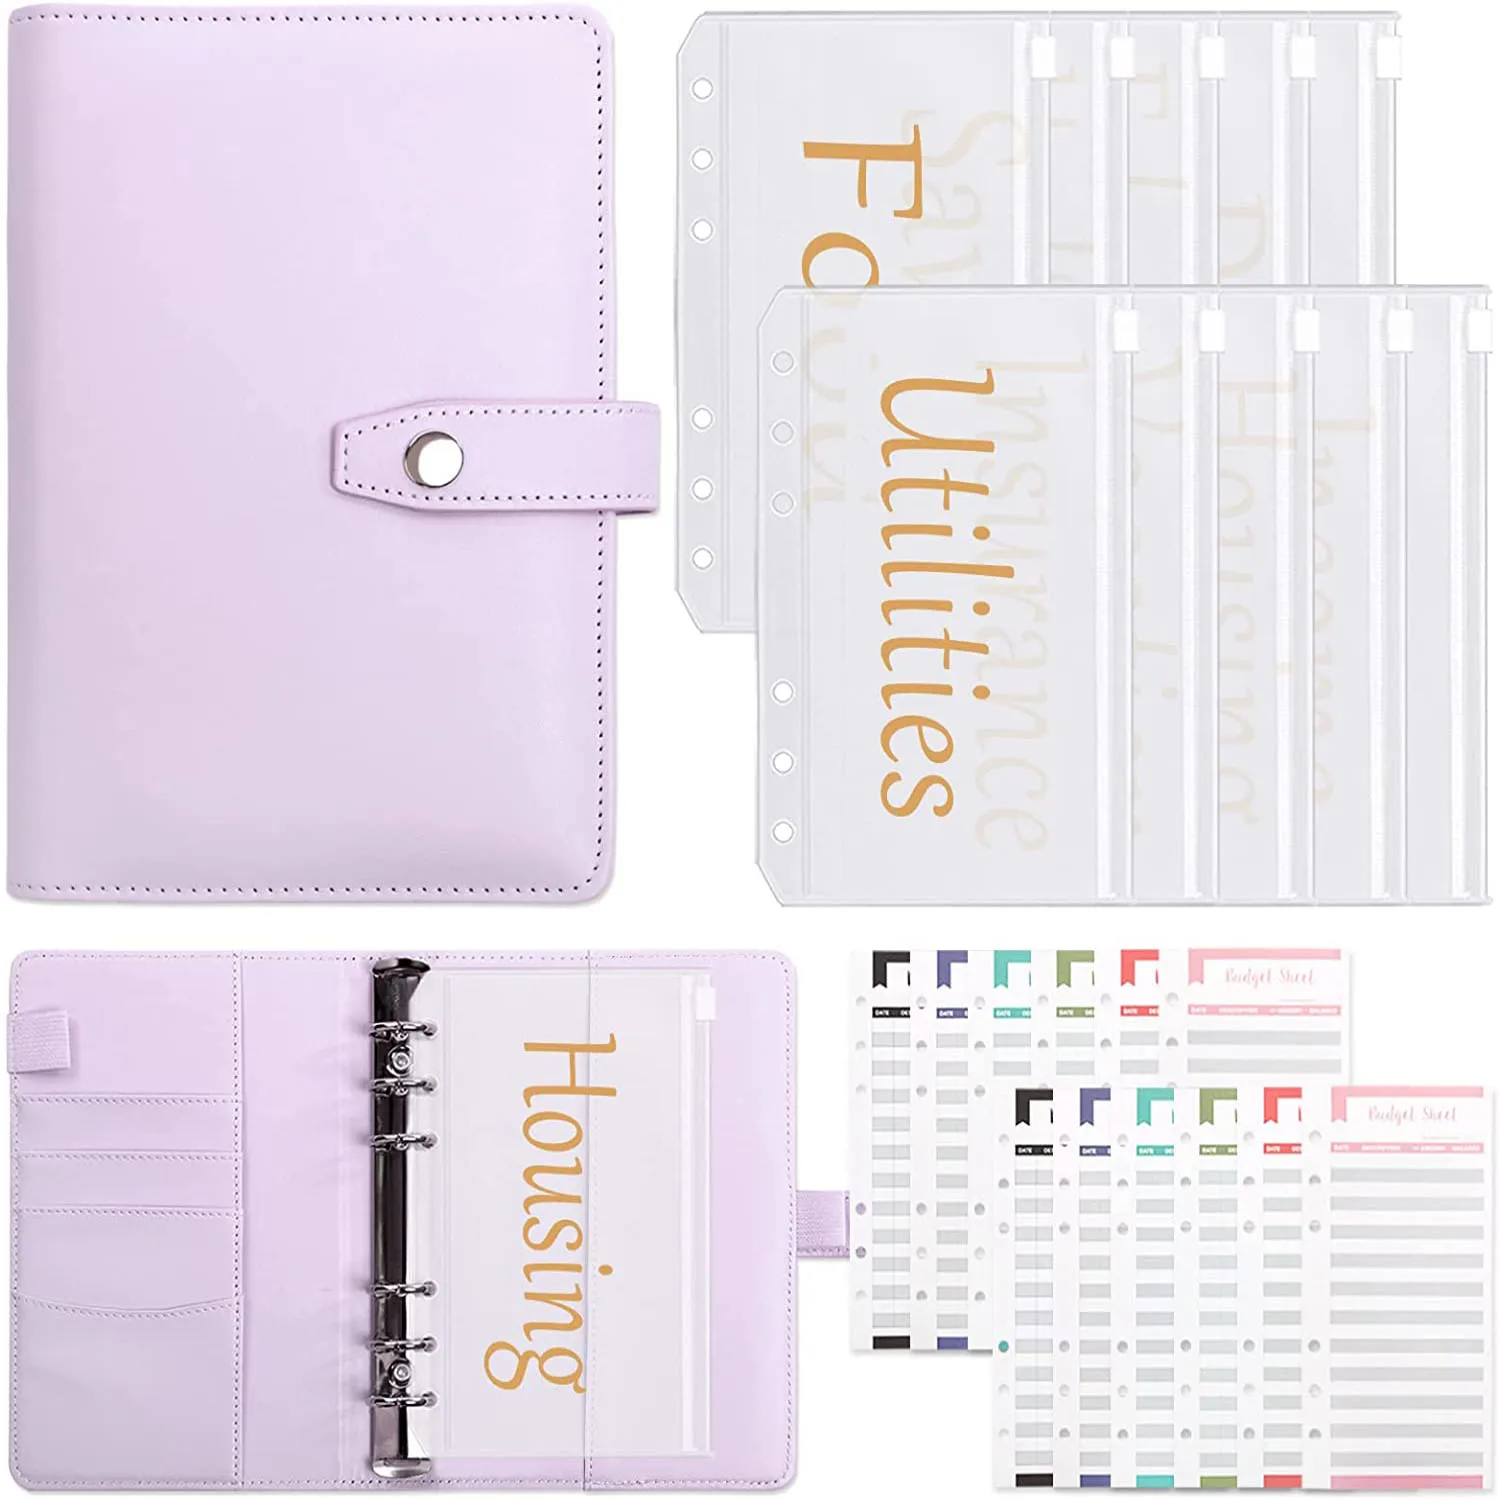 A6 Budget Binder with 10pcs Pre-printed Cash Envelopes for Budgeting,12 Expense Budget Sheets,Planner Organizer for Saving Money 28pcs a6 budget binder with cash envelopes money saving binder cash envelopes planner organizer for budgeting and management